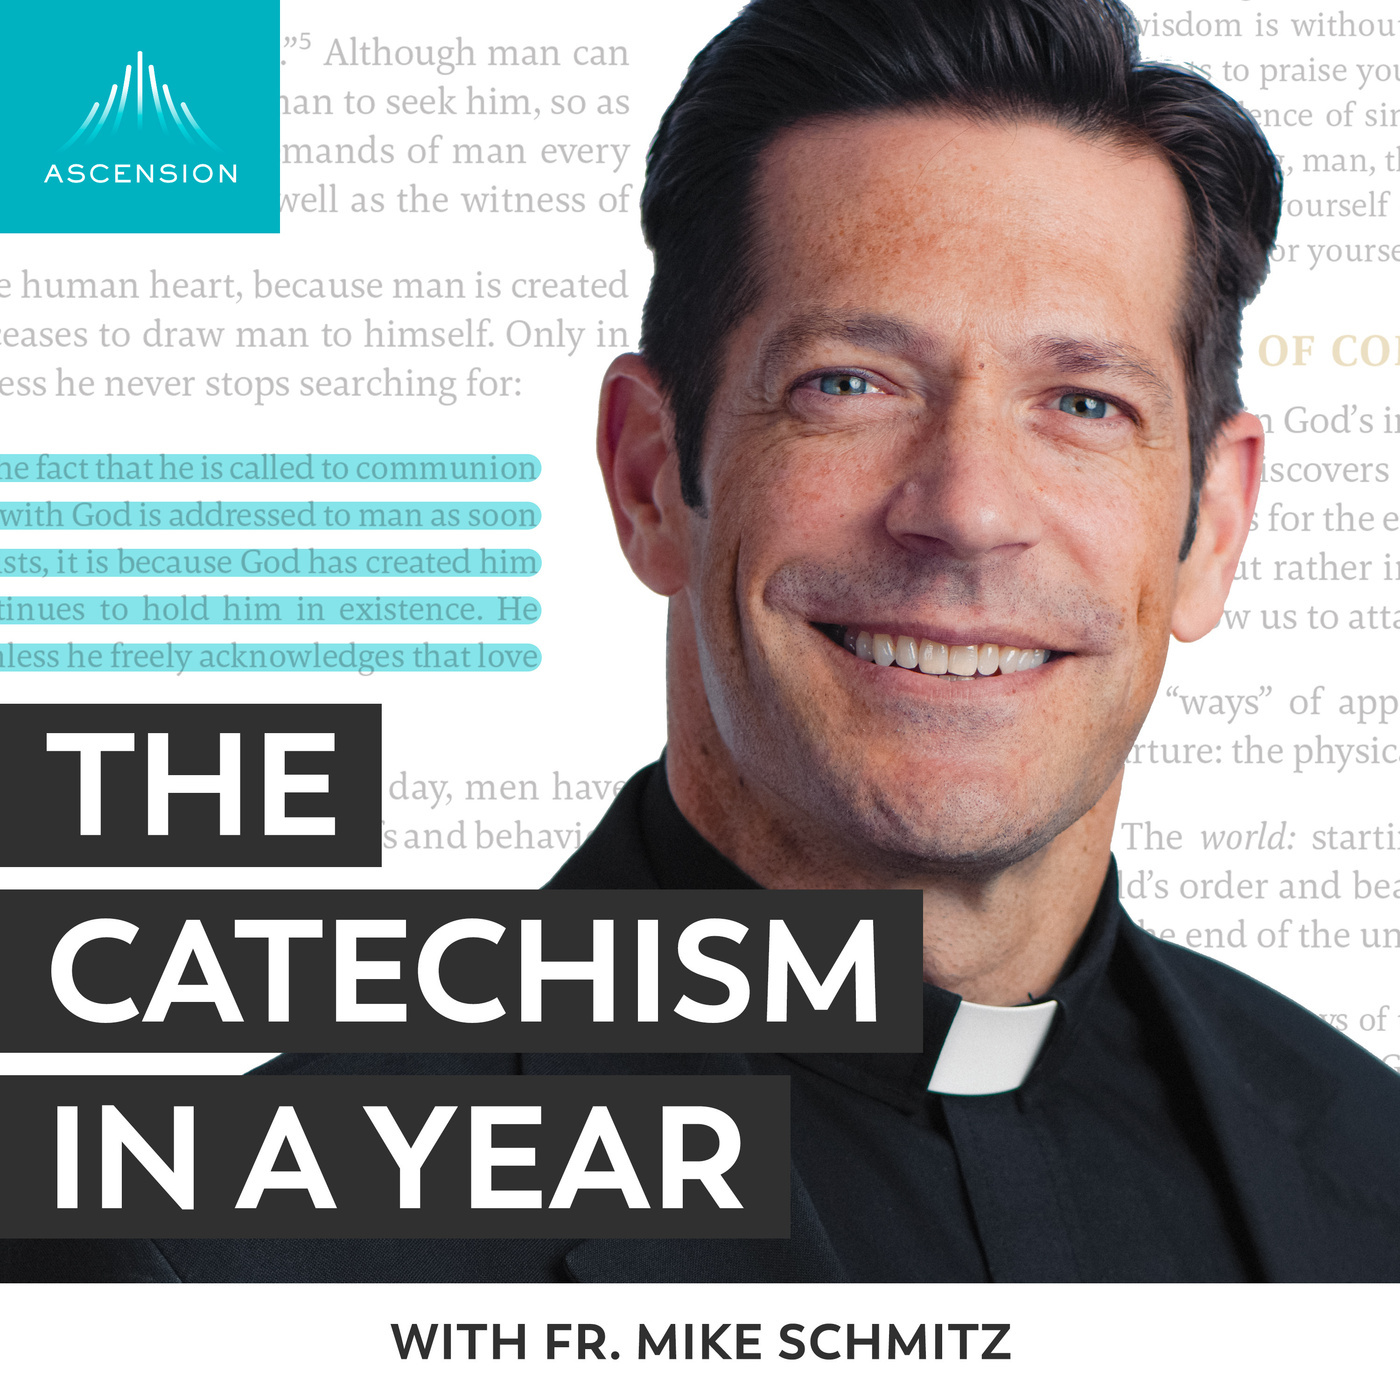 The Catechism in a Year (with Fr. Mike Schmitz): Day 37: The Divine Economy